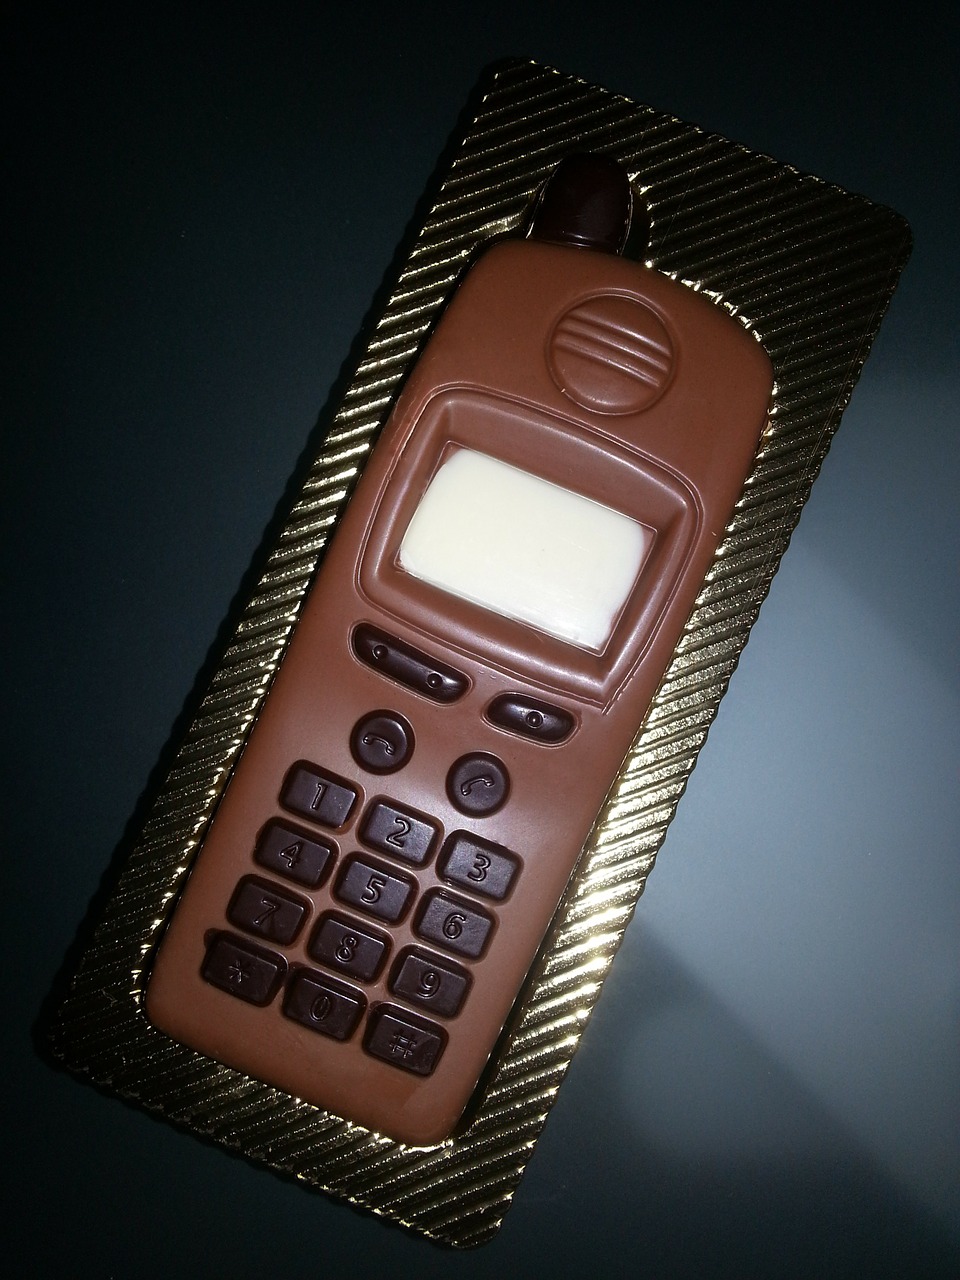 chocolate mobile phone candy free photo